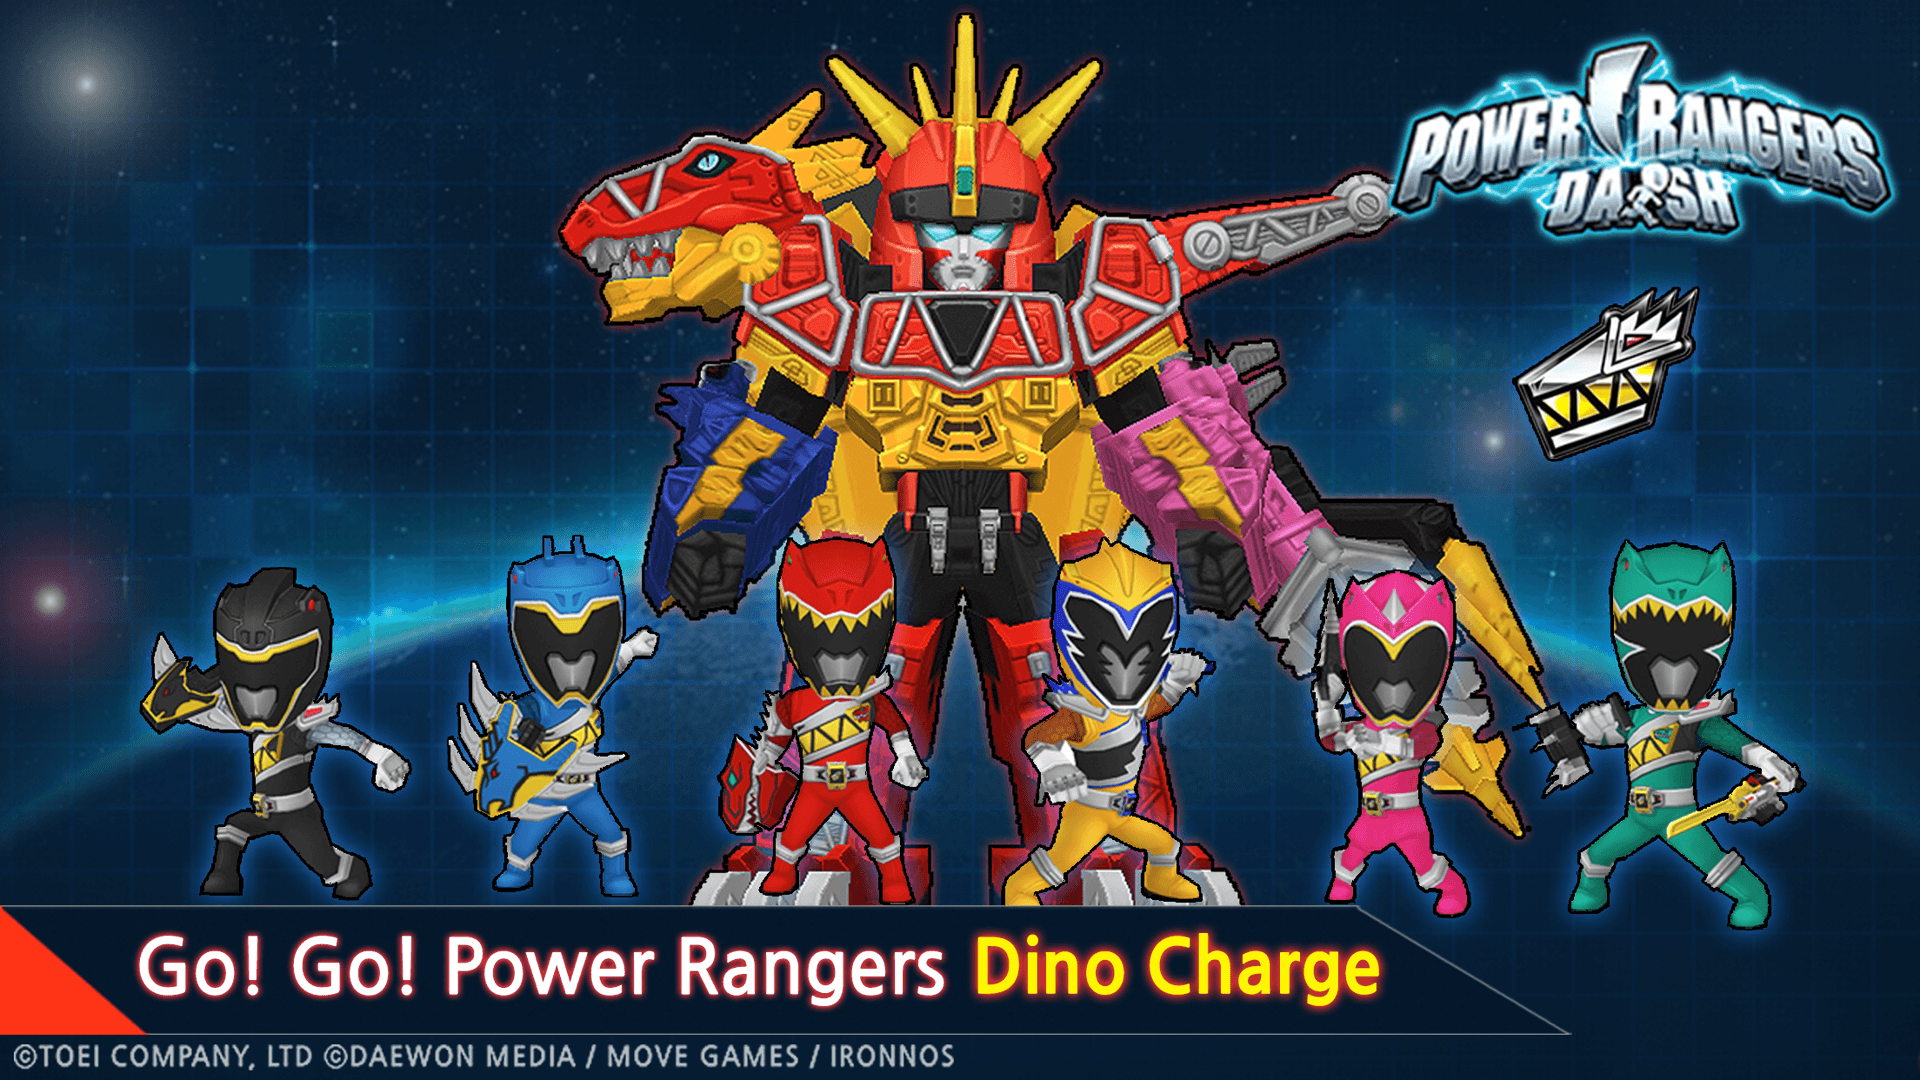 Power Rangers Dash (Asia) Play Store revenue & download